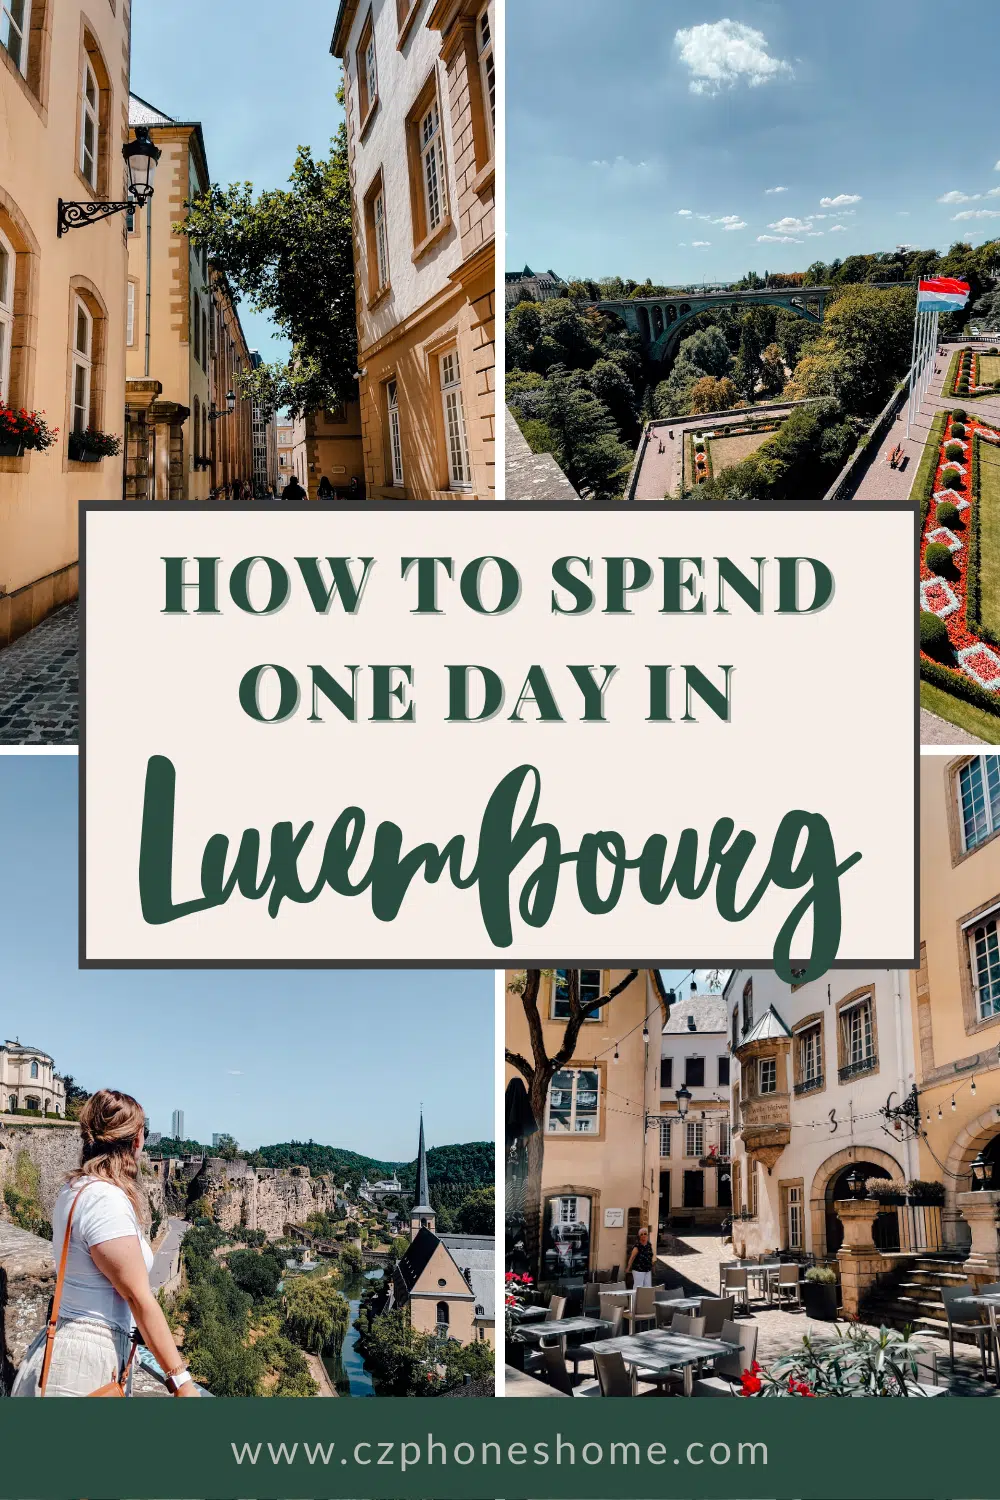 A collage of photos showing the beauty of what you can do in Luxembourg for just one day including the beautiful view points and tiny streets